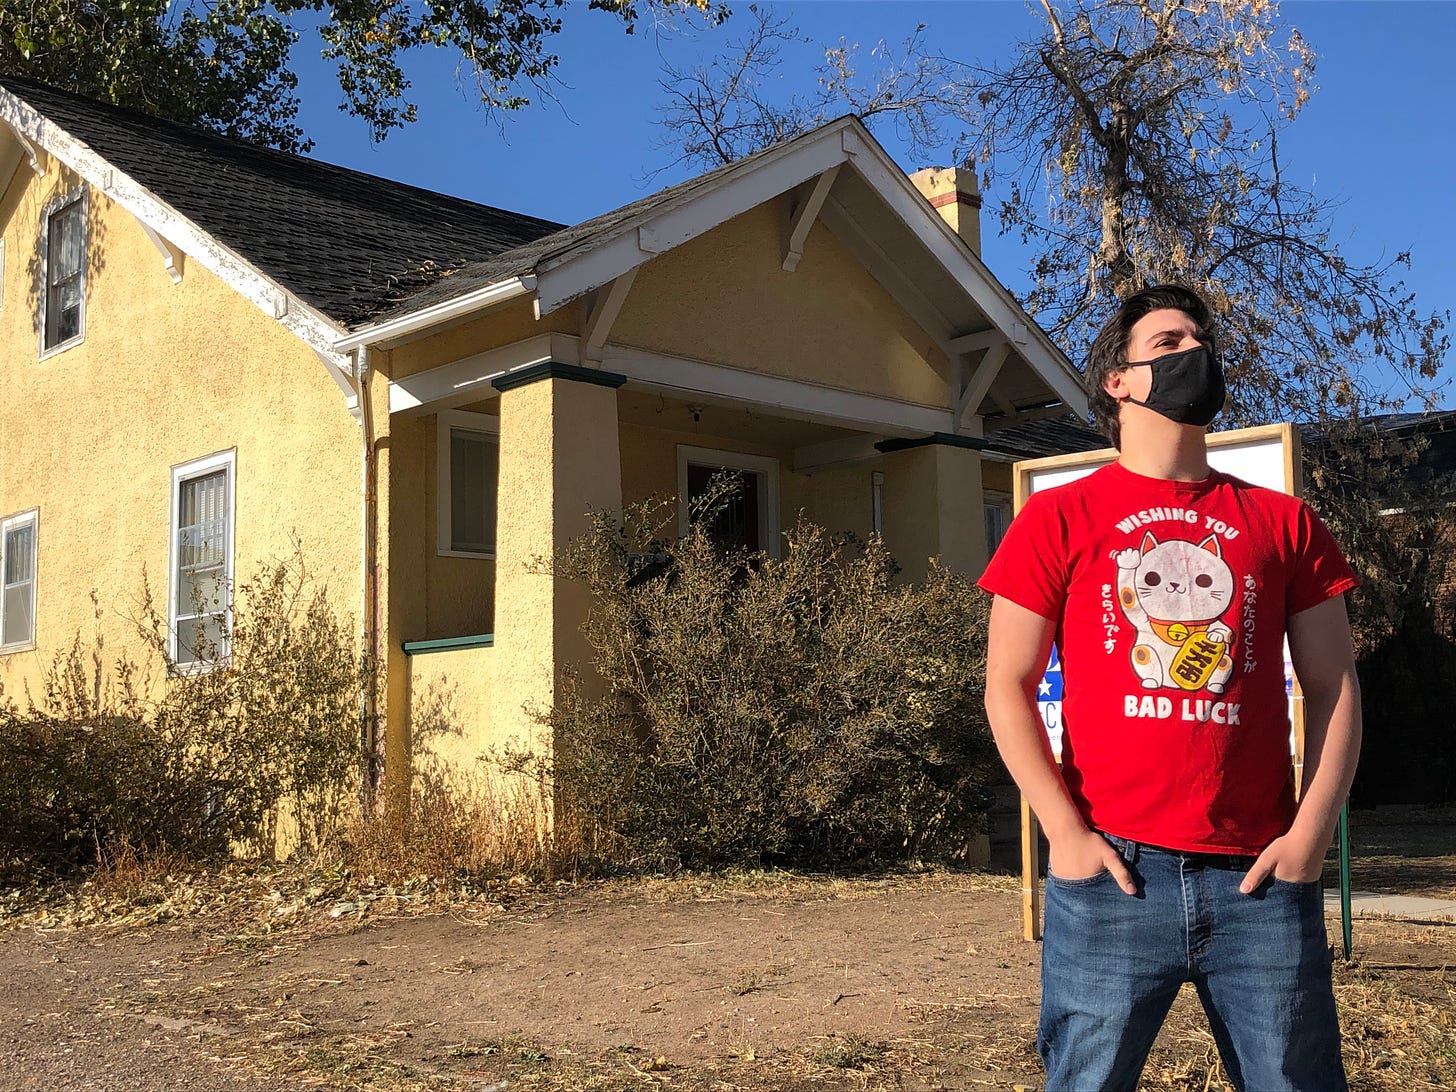 A young man in a red t-shirt and black mask stands in front of a yellow house.